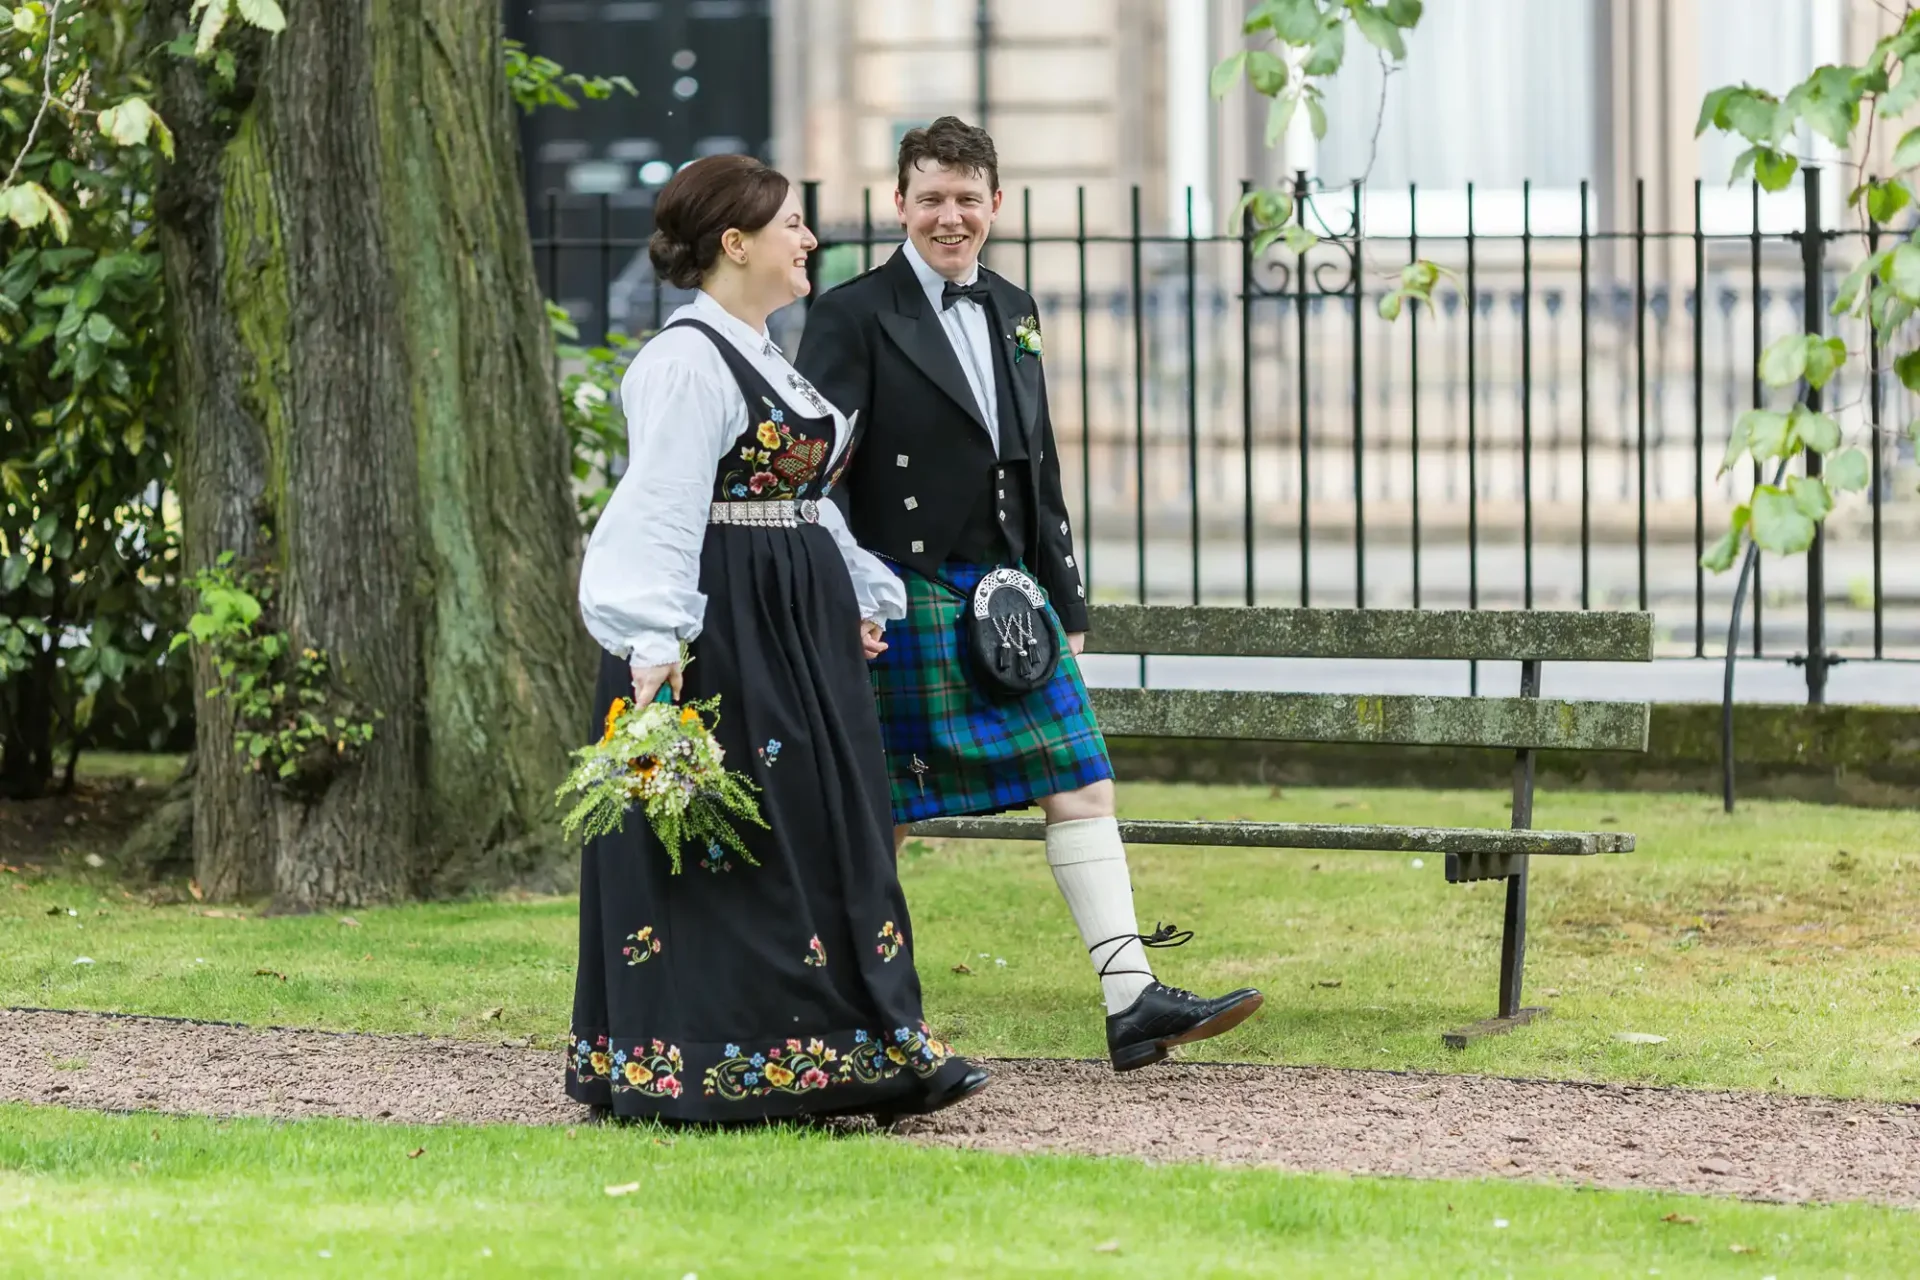 A couple in traditional attire walking in a park, the woman in a floral dress and the man in a tartan kilt, both smiling.